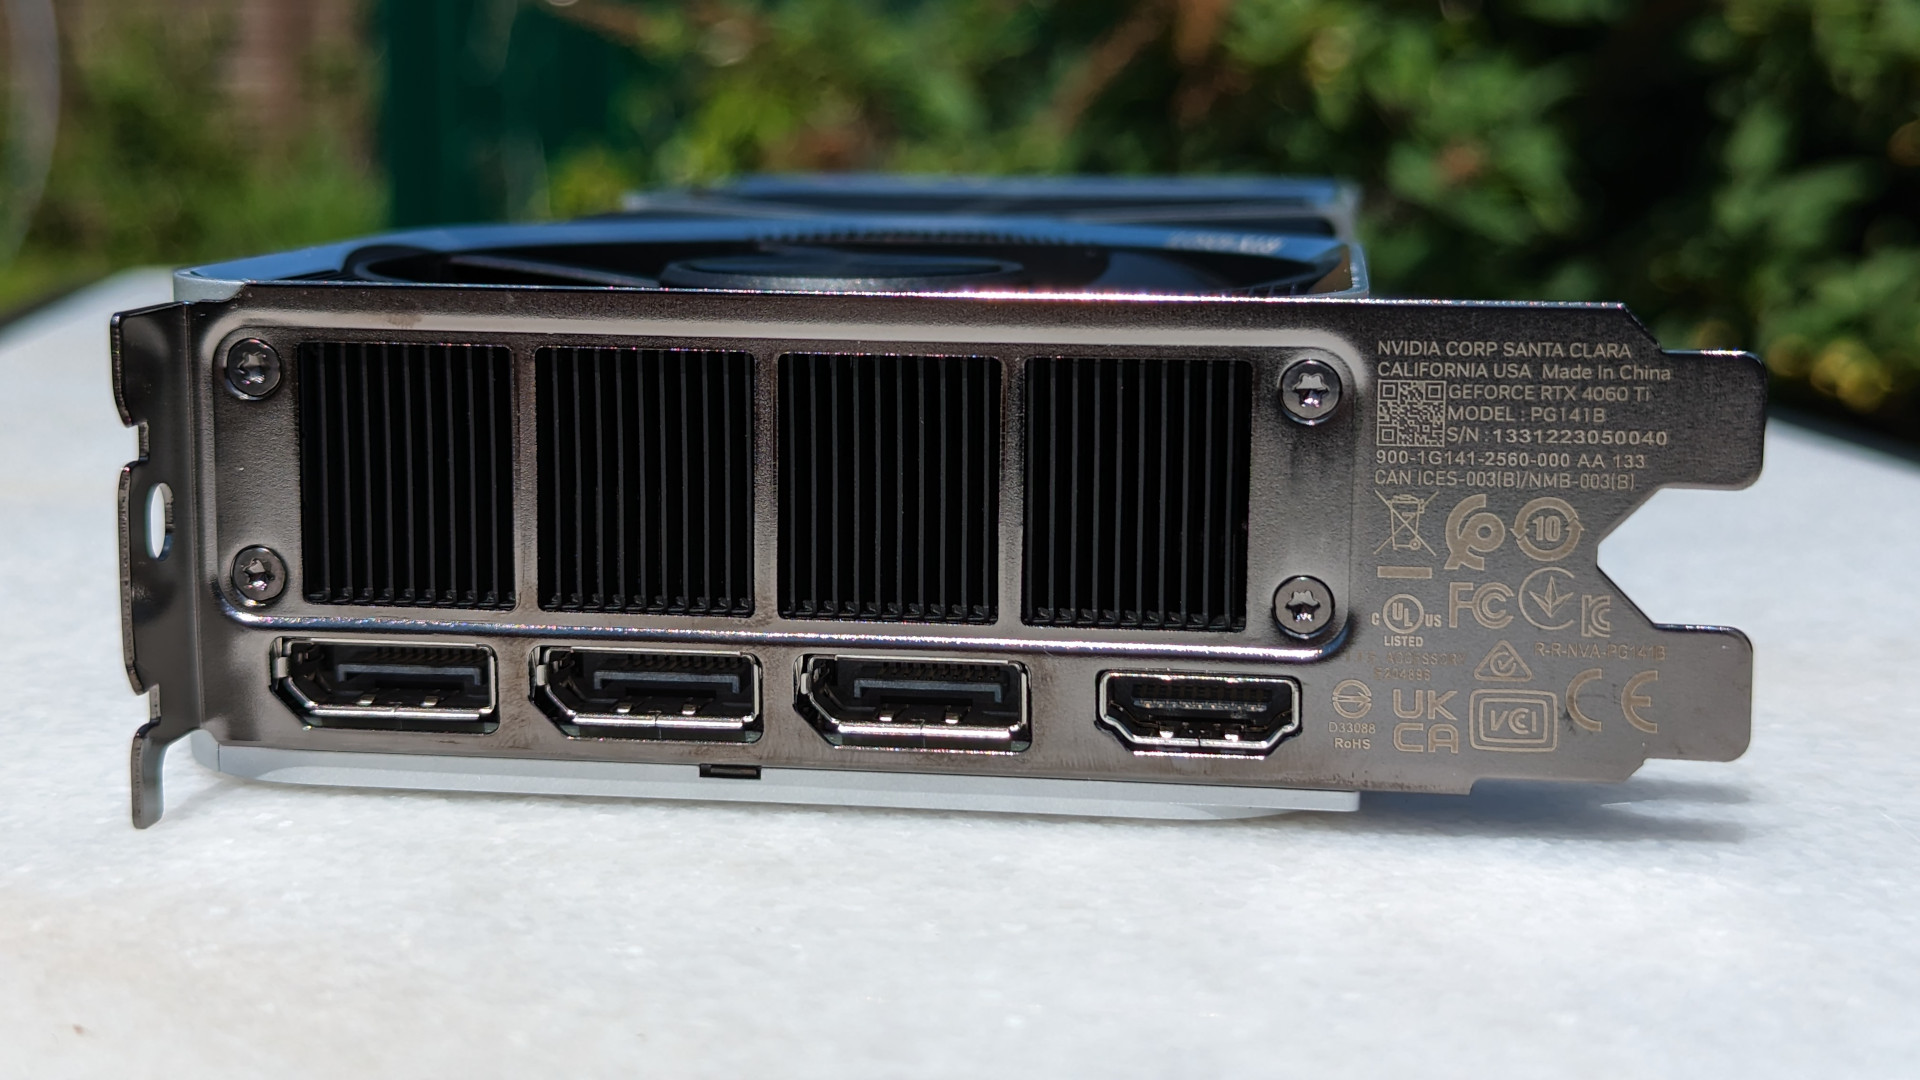 Nvidia GeForce RTX 4060 Ti 8GB review: The display inputs of the Founders Edition, including DisplayPort and HDMI ports